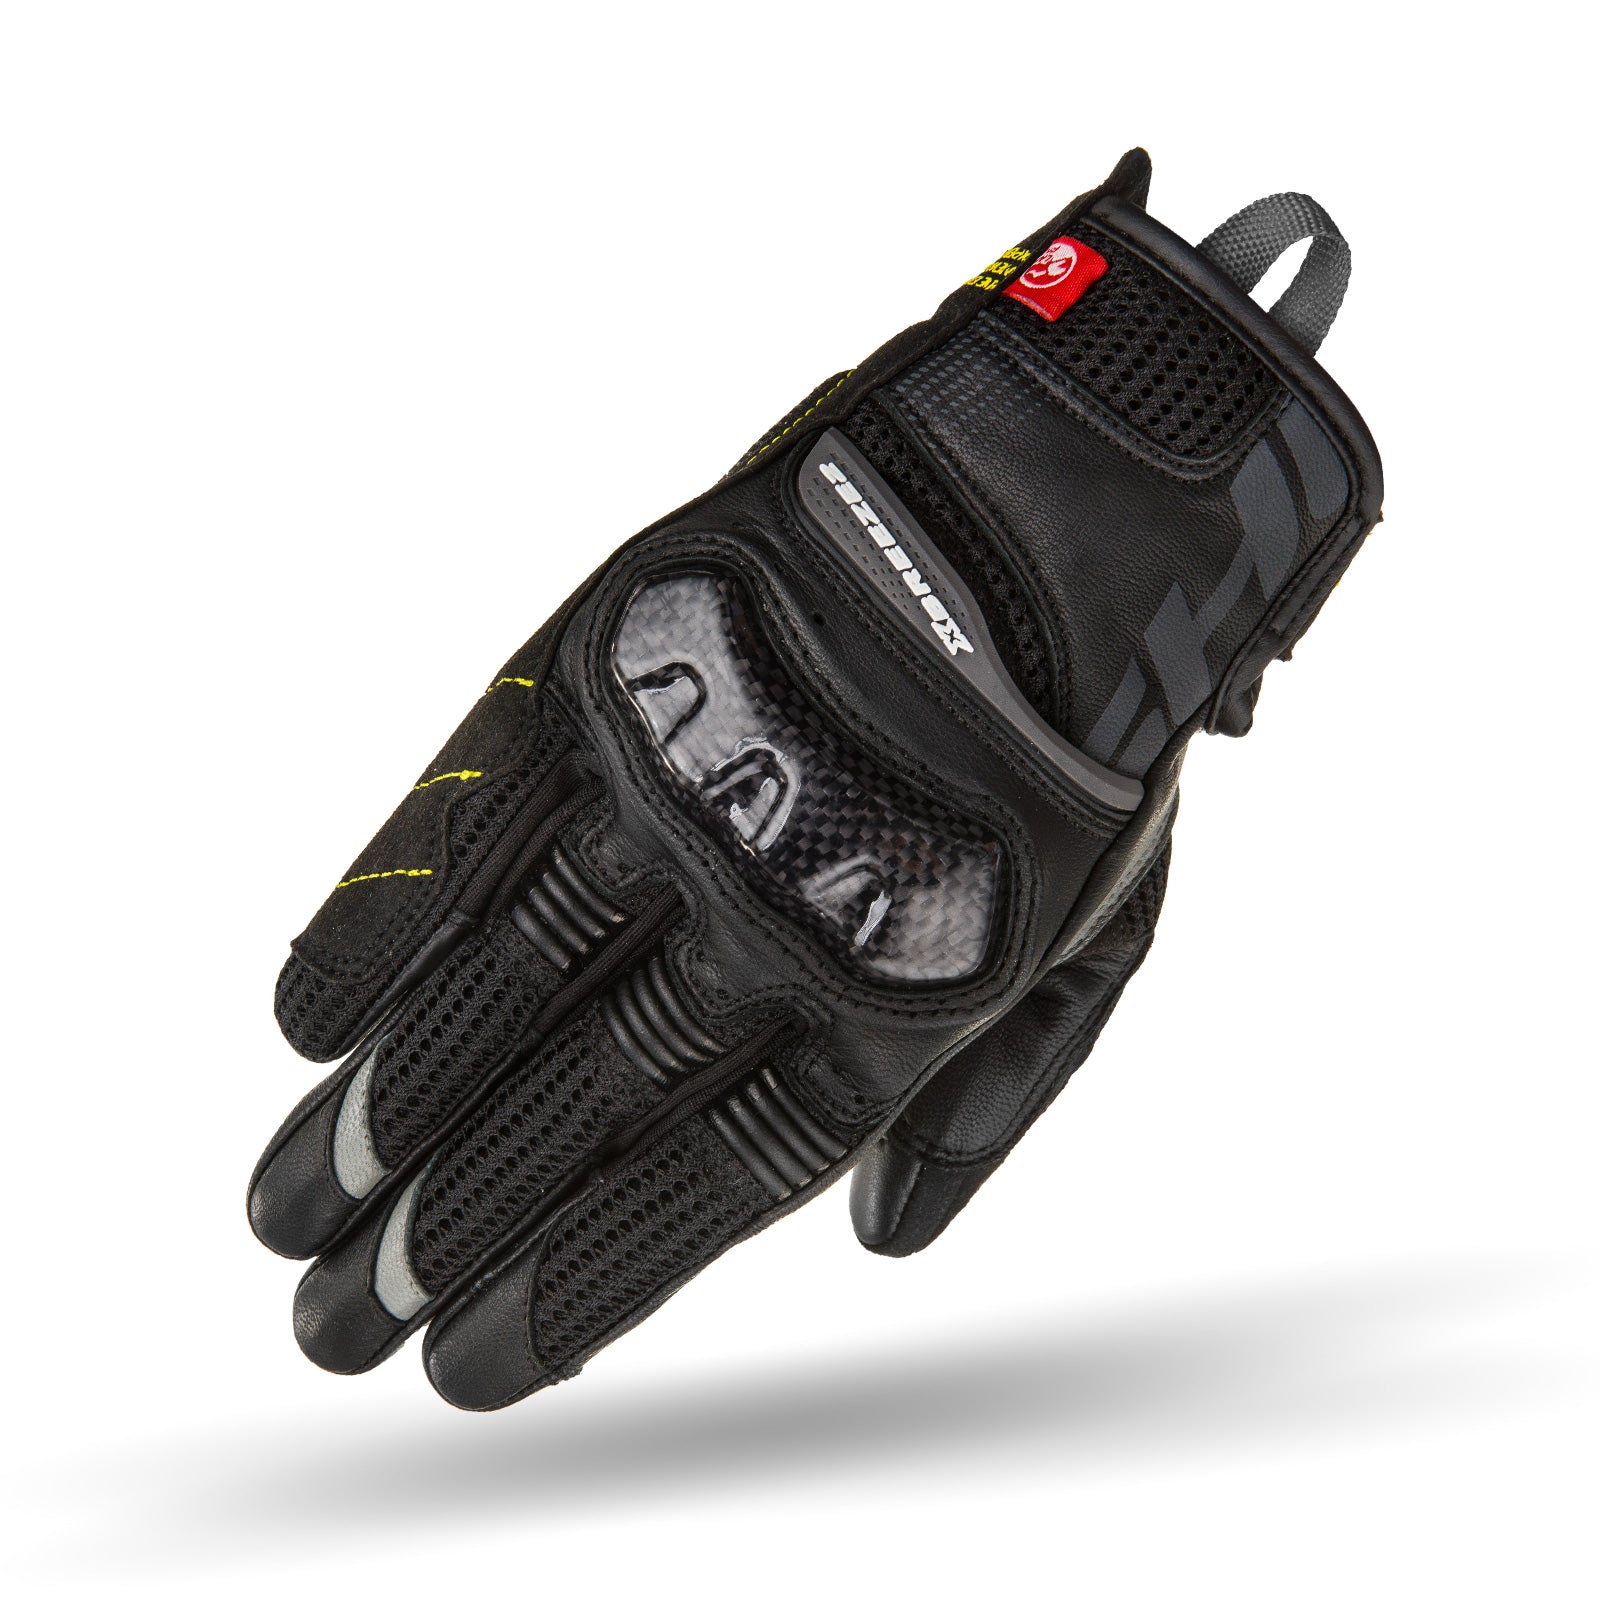 Black female motorcycle glove from Shima